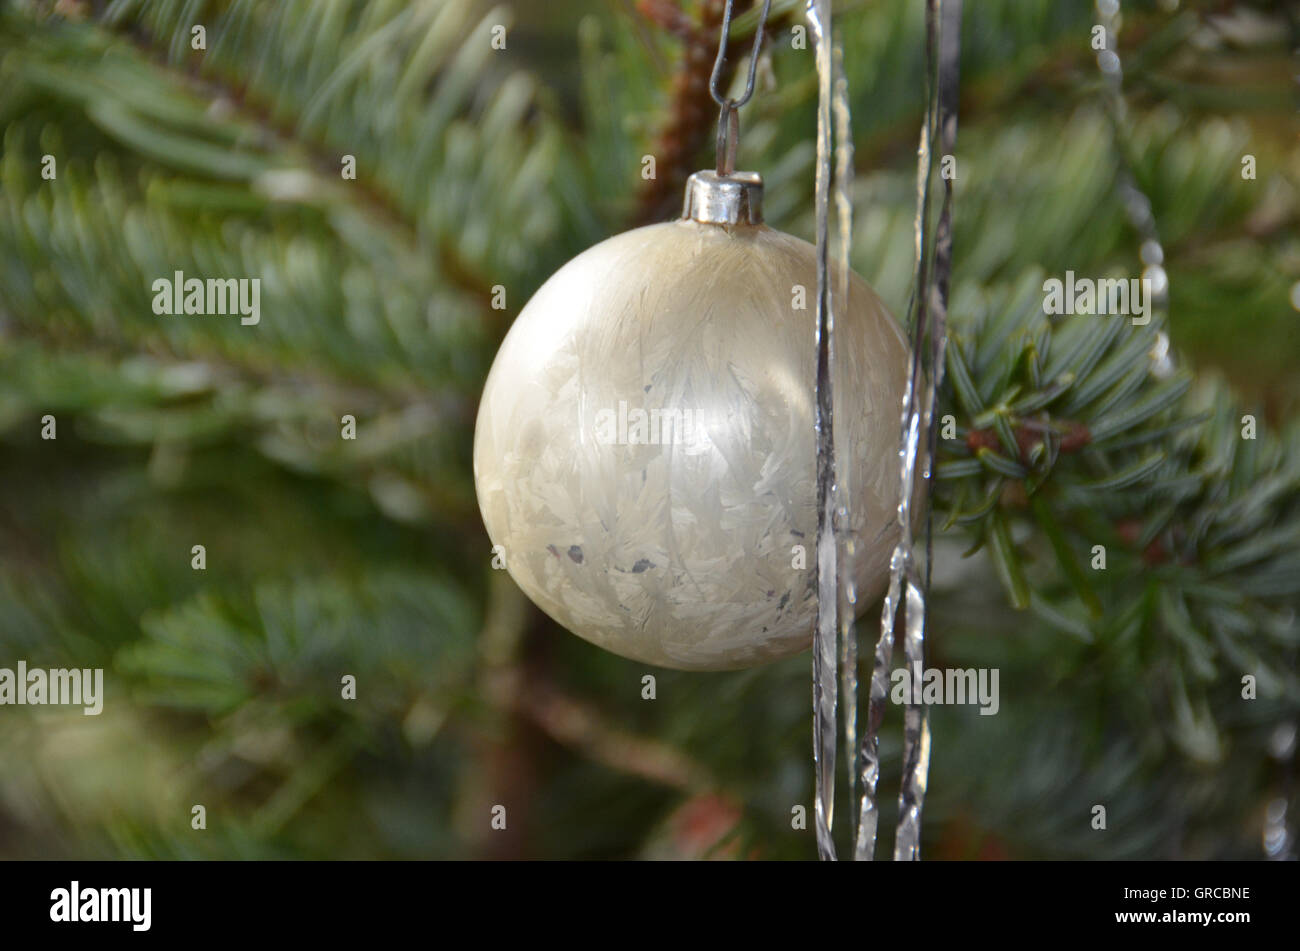 Christmas Tree Decorations, Glass Ball And Tinsel On Fir Branch Stock Photo